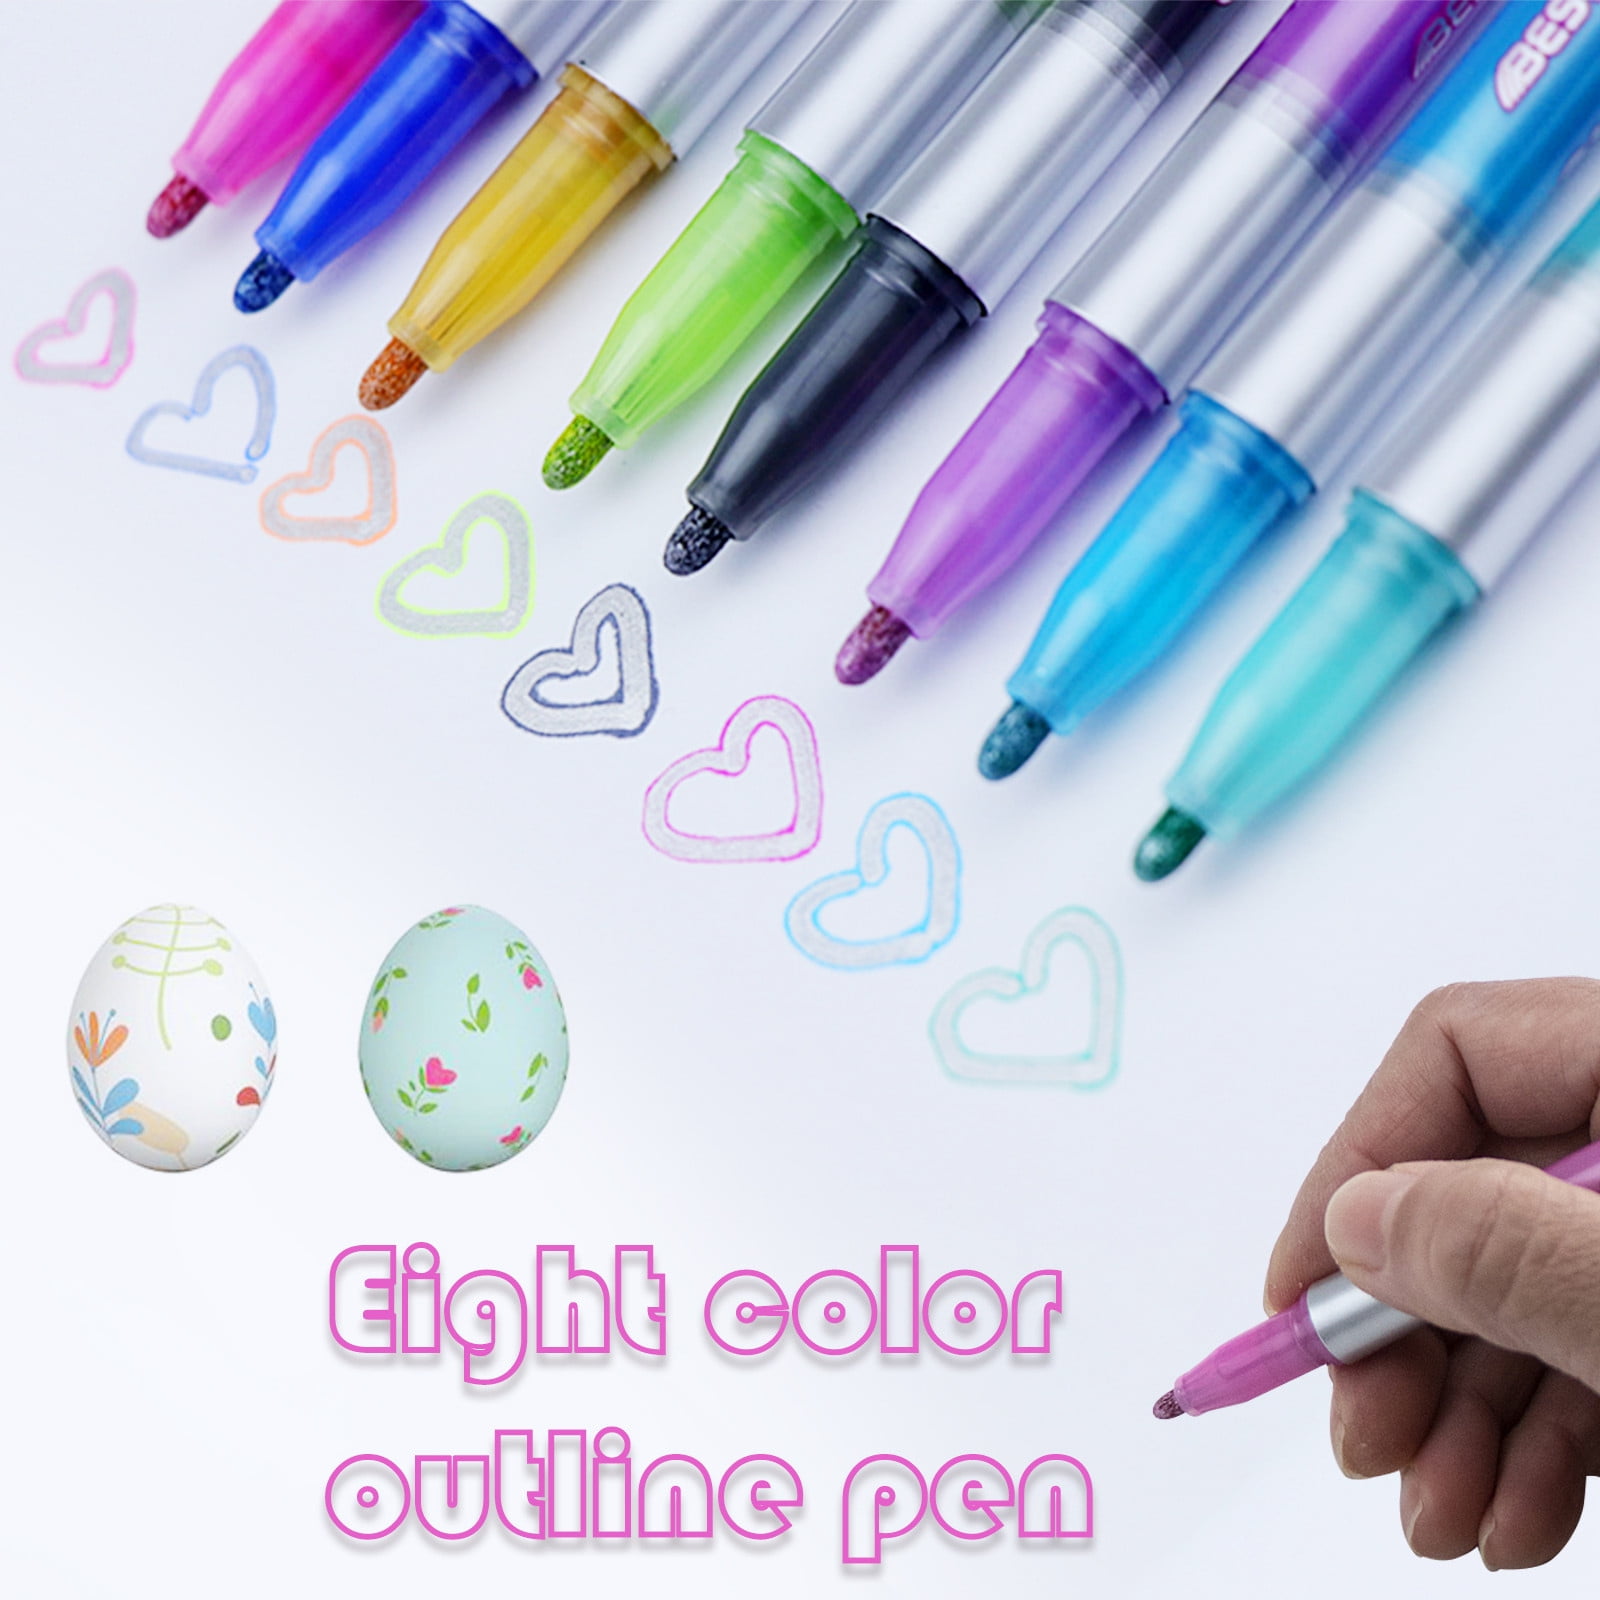 pen for students cool pens 10x Creative Lanyard Ball-point Pen kids